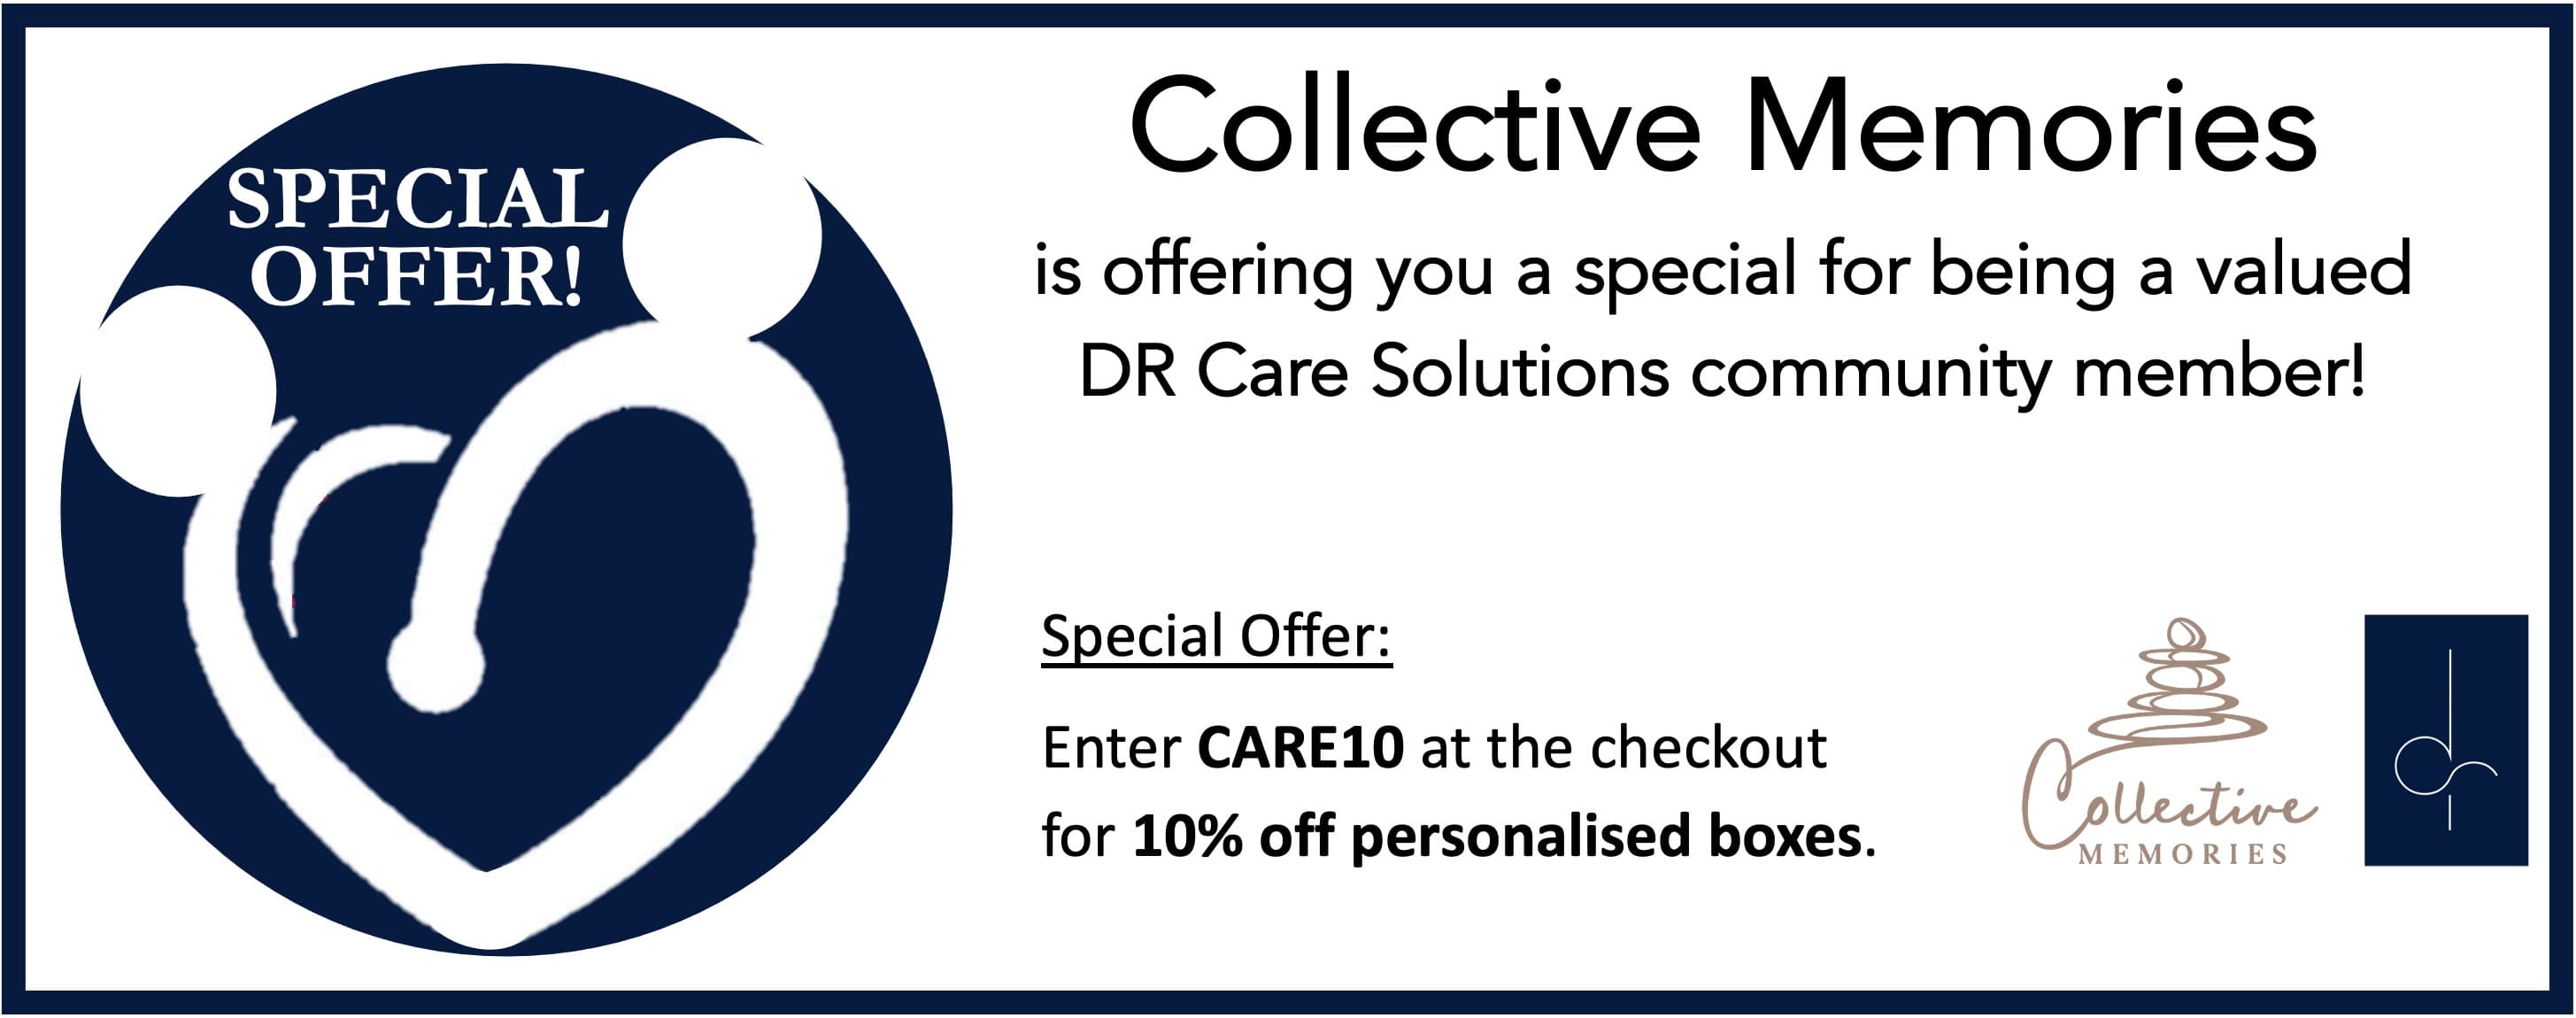 Collective Memories - Special Offer